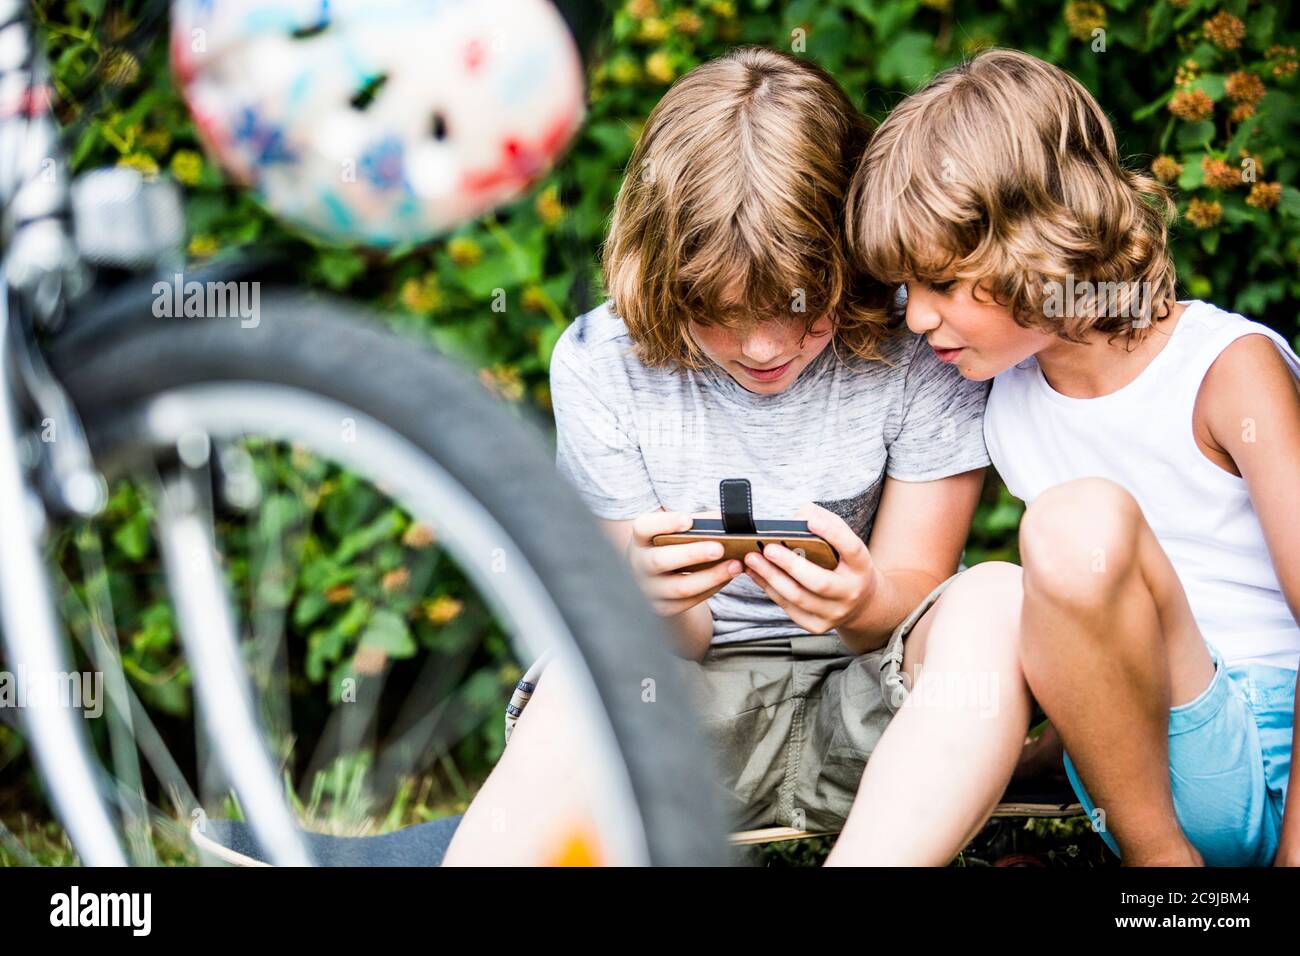 Boys playing games on mobile phone. Stock Photo